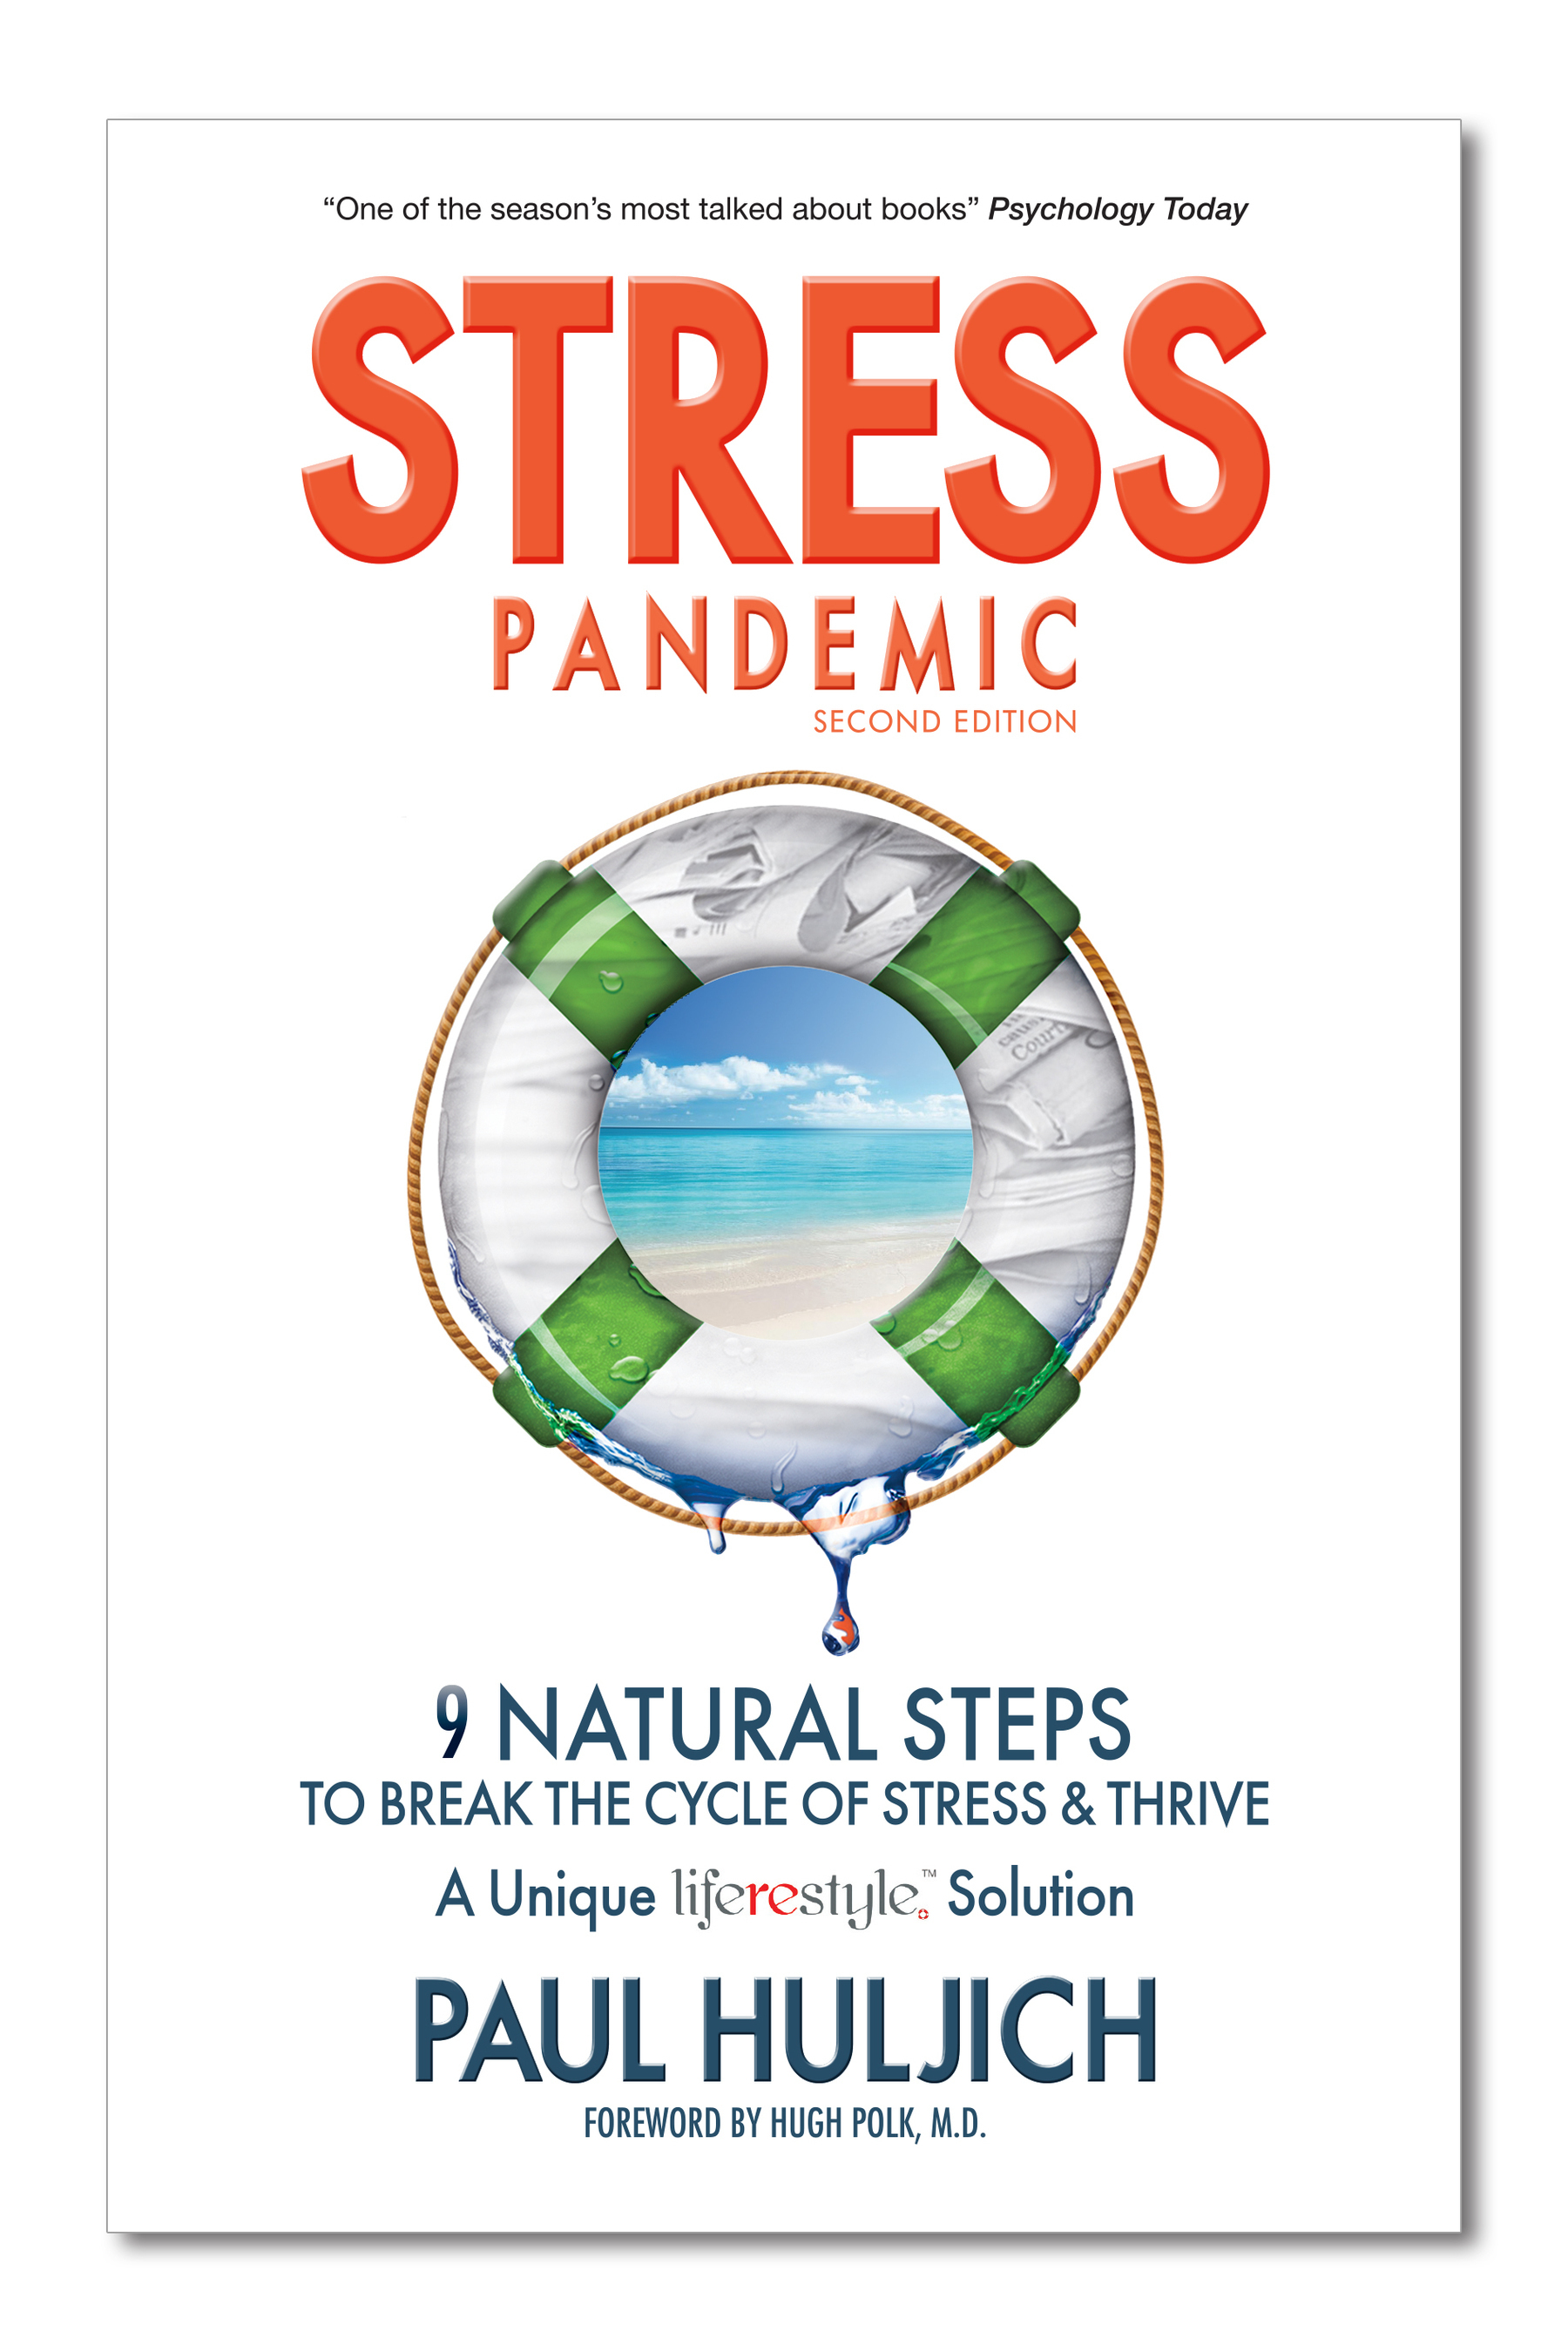 Stress Pandemic, 9 Natural Steps to Break the Cycle of Stress and Thrive by Paul Huljich